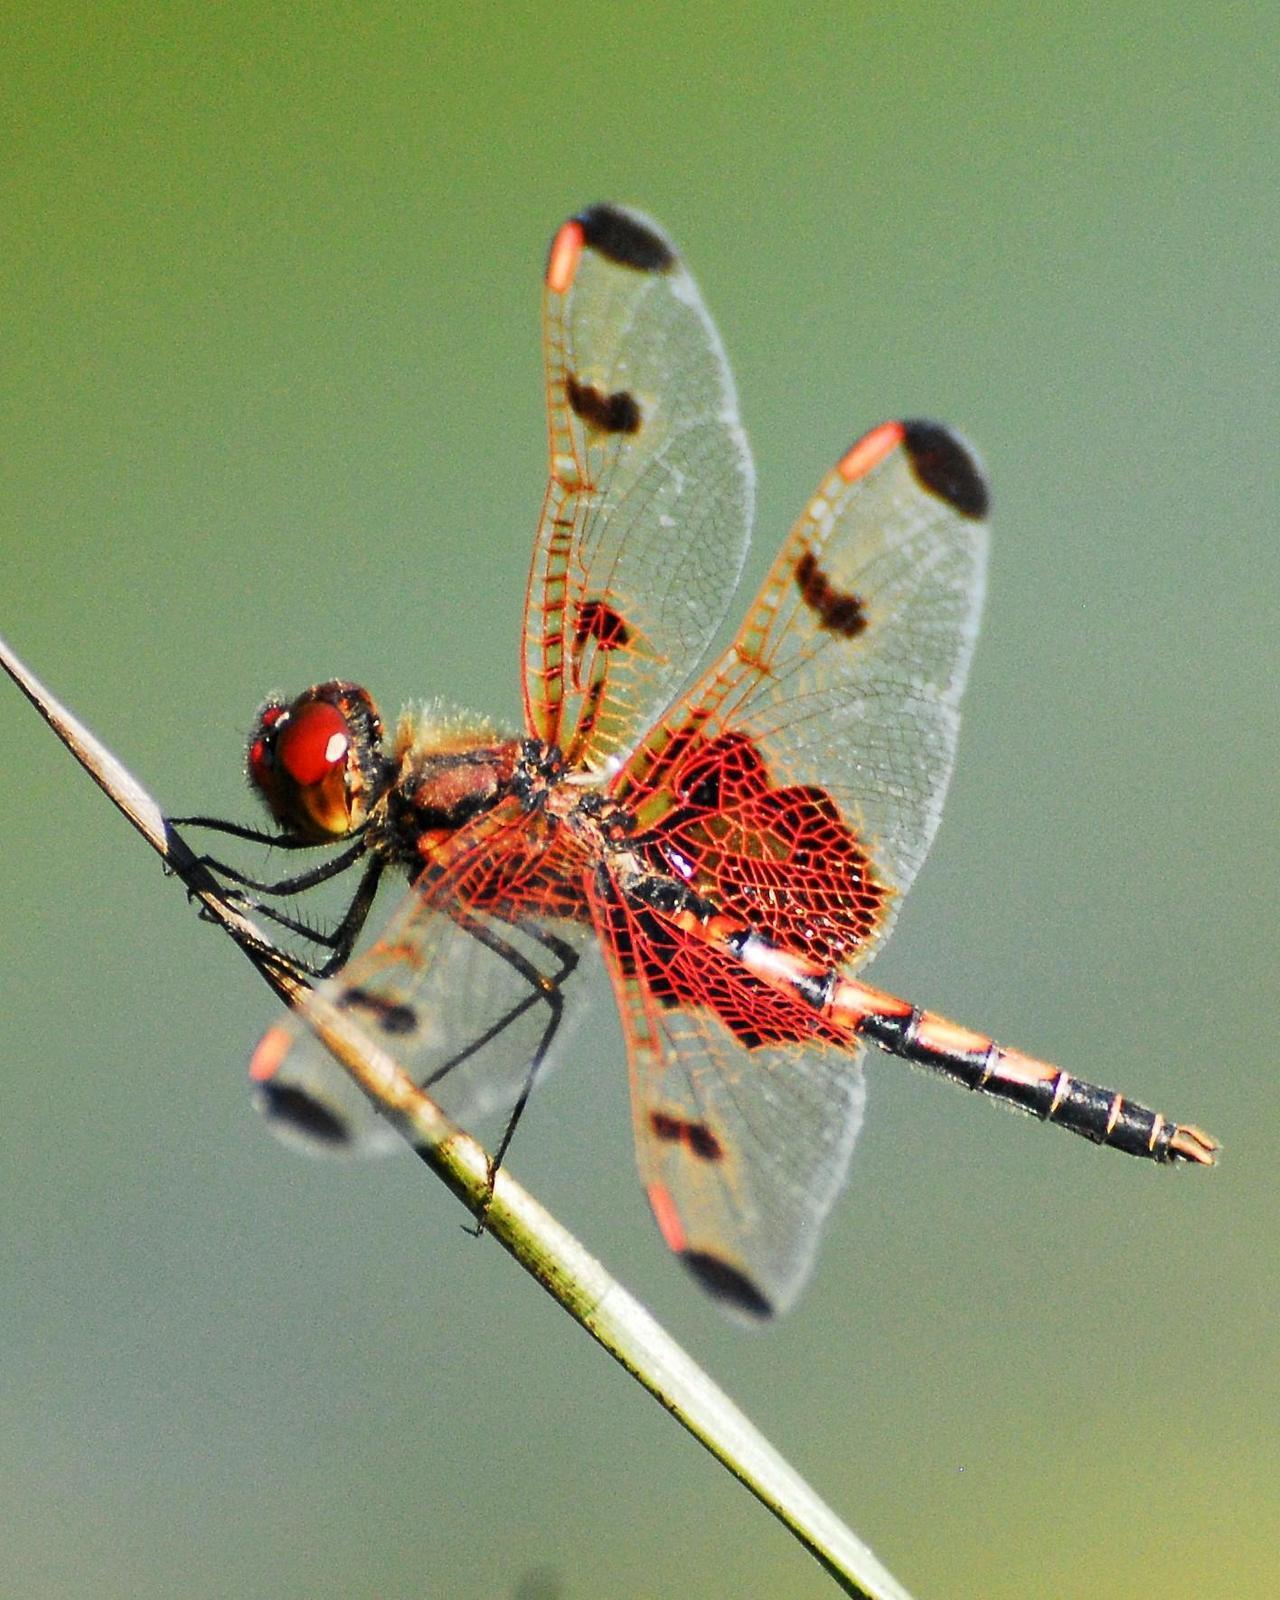 Calico Pennant Photo by David Hollie